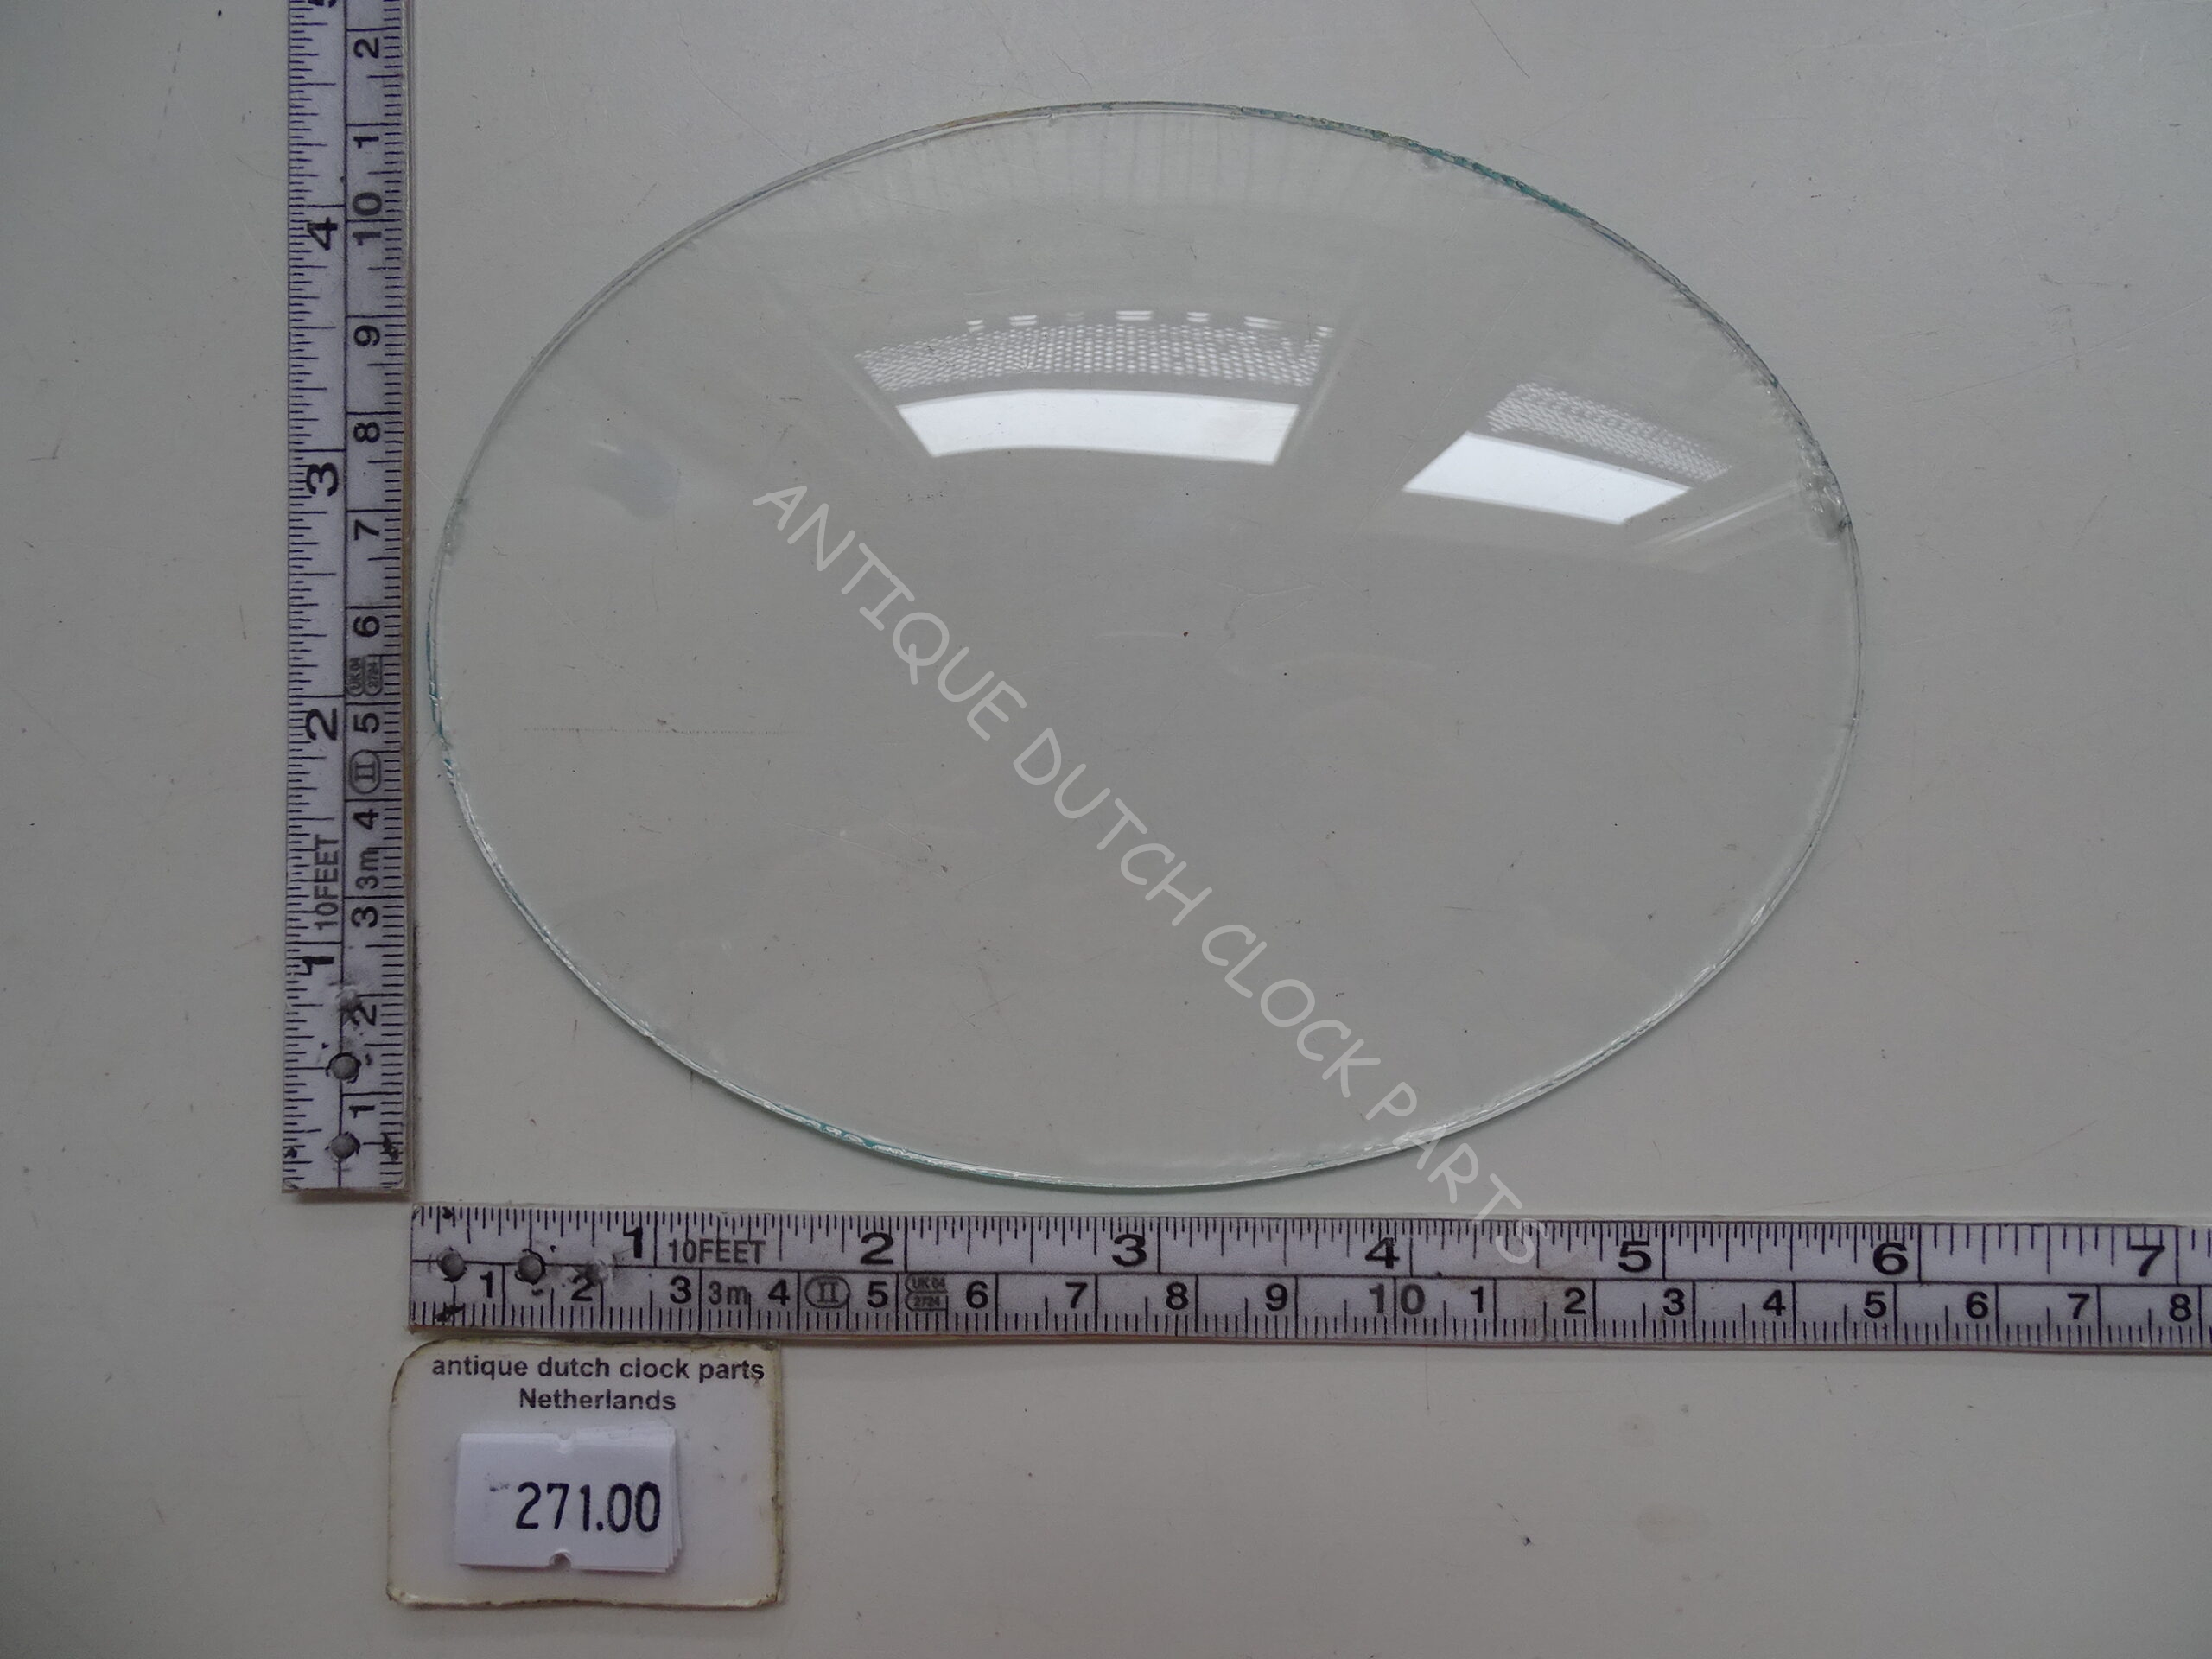 OVAL CONVEX CLOCK GLASS 5 3/4" OR 14,6 CM WIDE AND 4 3/8" OR 11 CM TALL